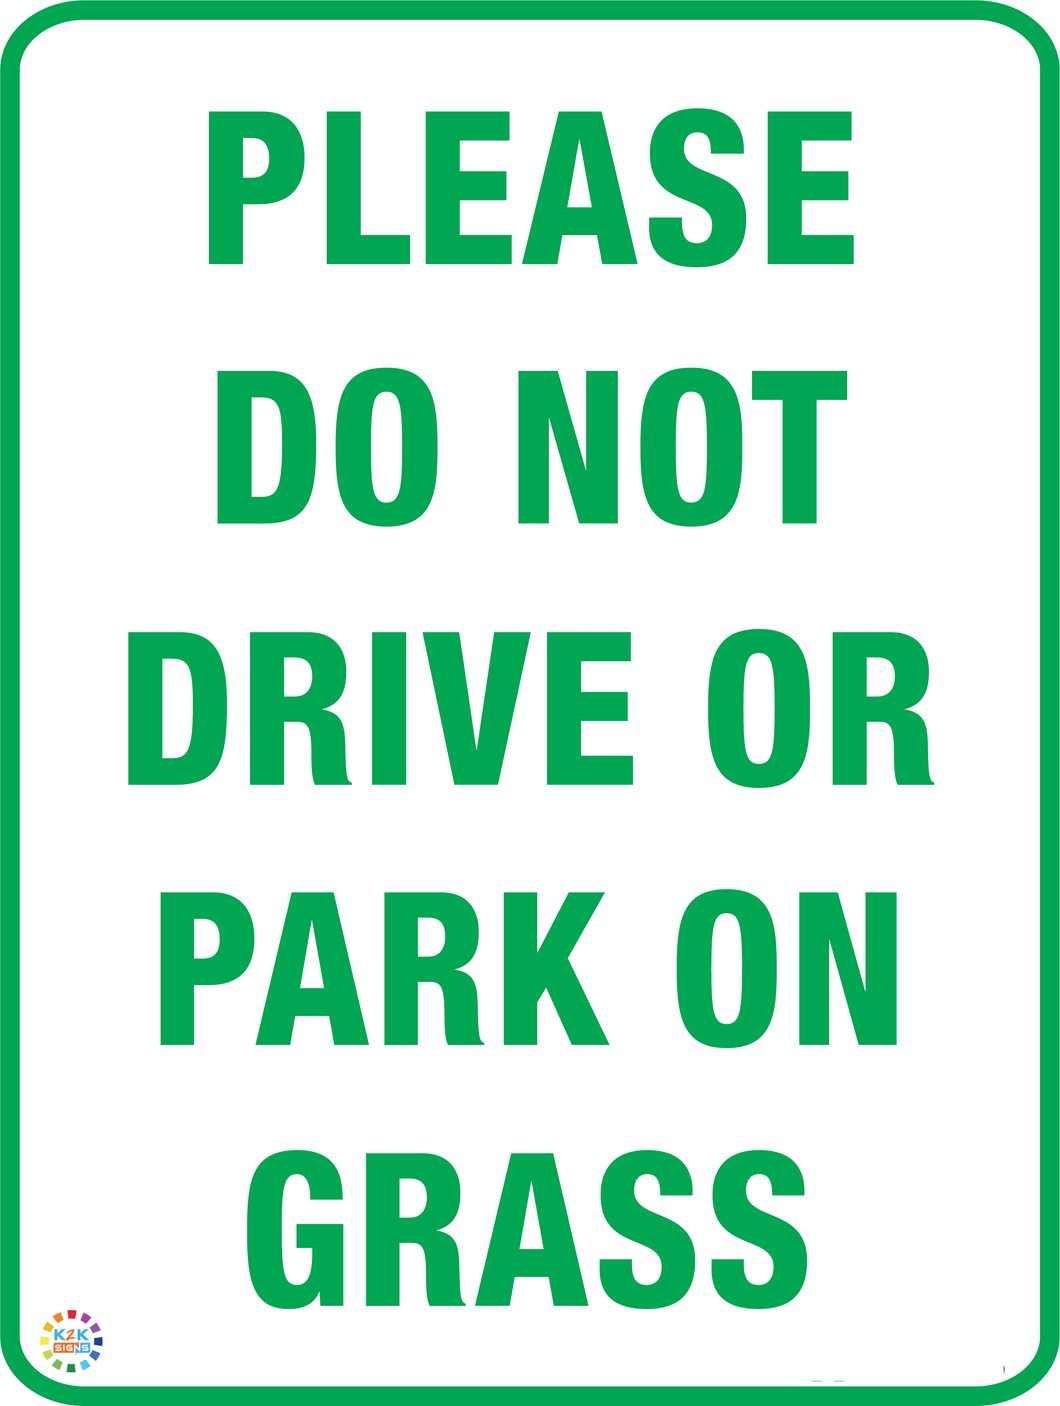 Please Do Not Drive or Park on Grass Sign